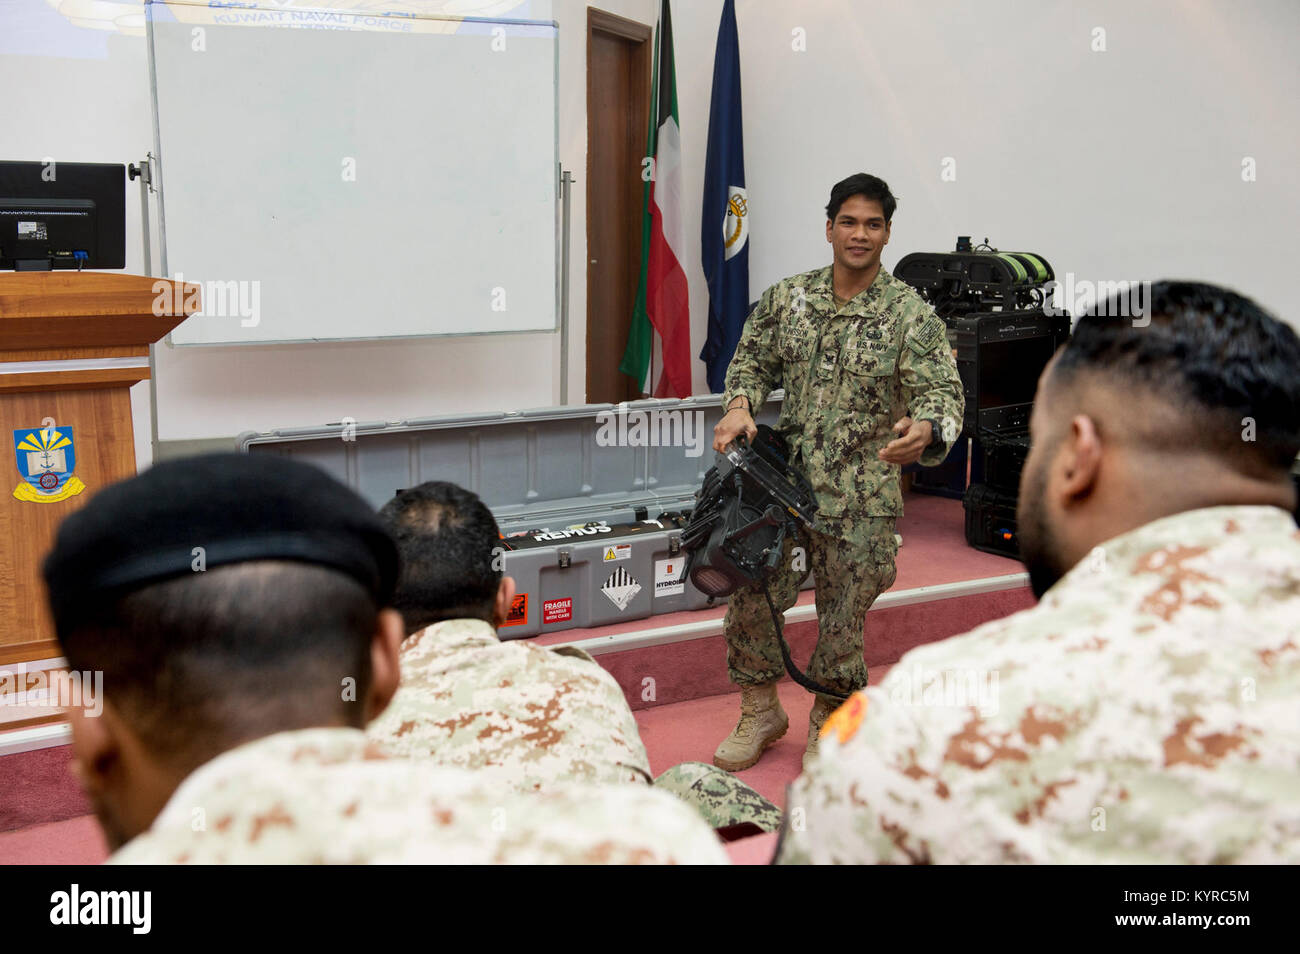 Mohammed Al-Ahmad Naval Base, KUWAIT (Jan. 7, 2018) Explosive Ordnance Disposal Technician 2nd Class Veranio-Xavier Tongson, assigned to Commander, Task Group 56.1, explains the capabilities of an underwater navigation system to Kuwait Naval Force explosive ordnance disposal technicians during a training evolution as part of exercise Eager Response 18. Eager Response 18 is a bilateral explosive ordnance disposal military exercise between the State of Kuwait and the United States. The exercise fortifies military-to-military relationships between the Kuwait Naval Force and U.S. Navy, advances th Stock Photo